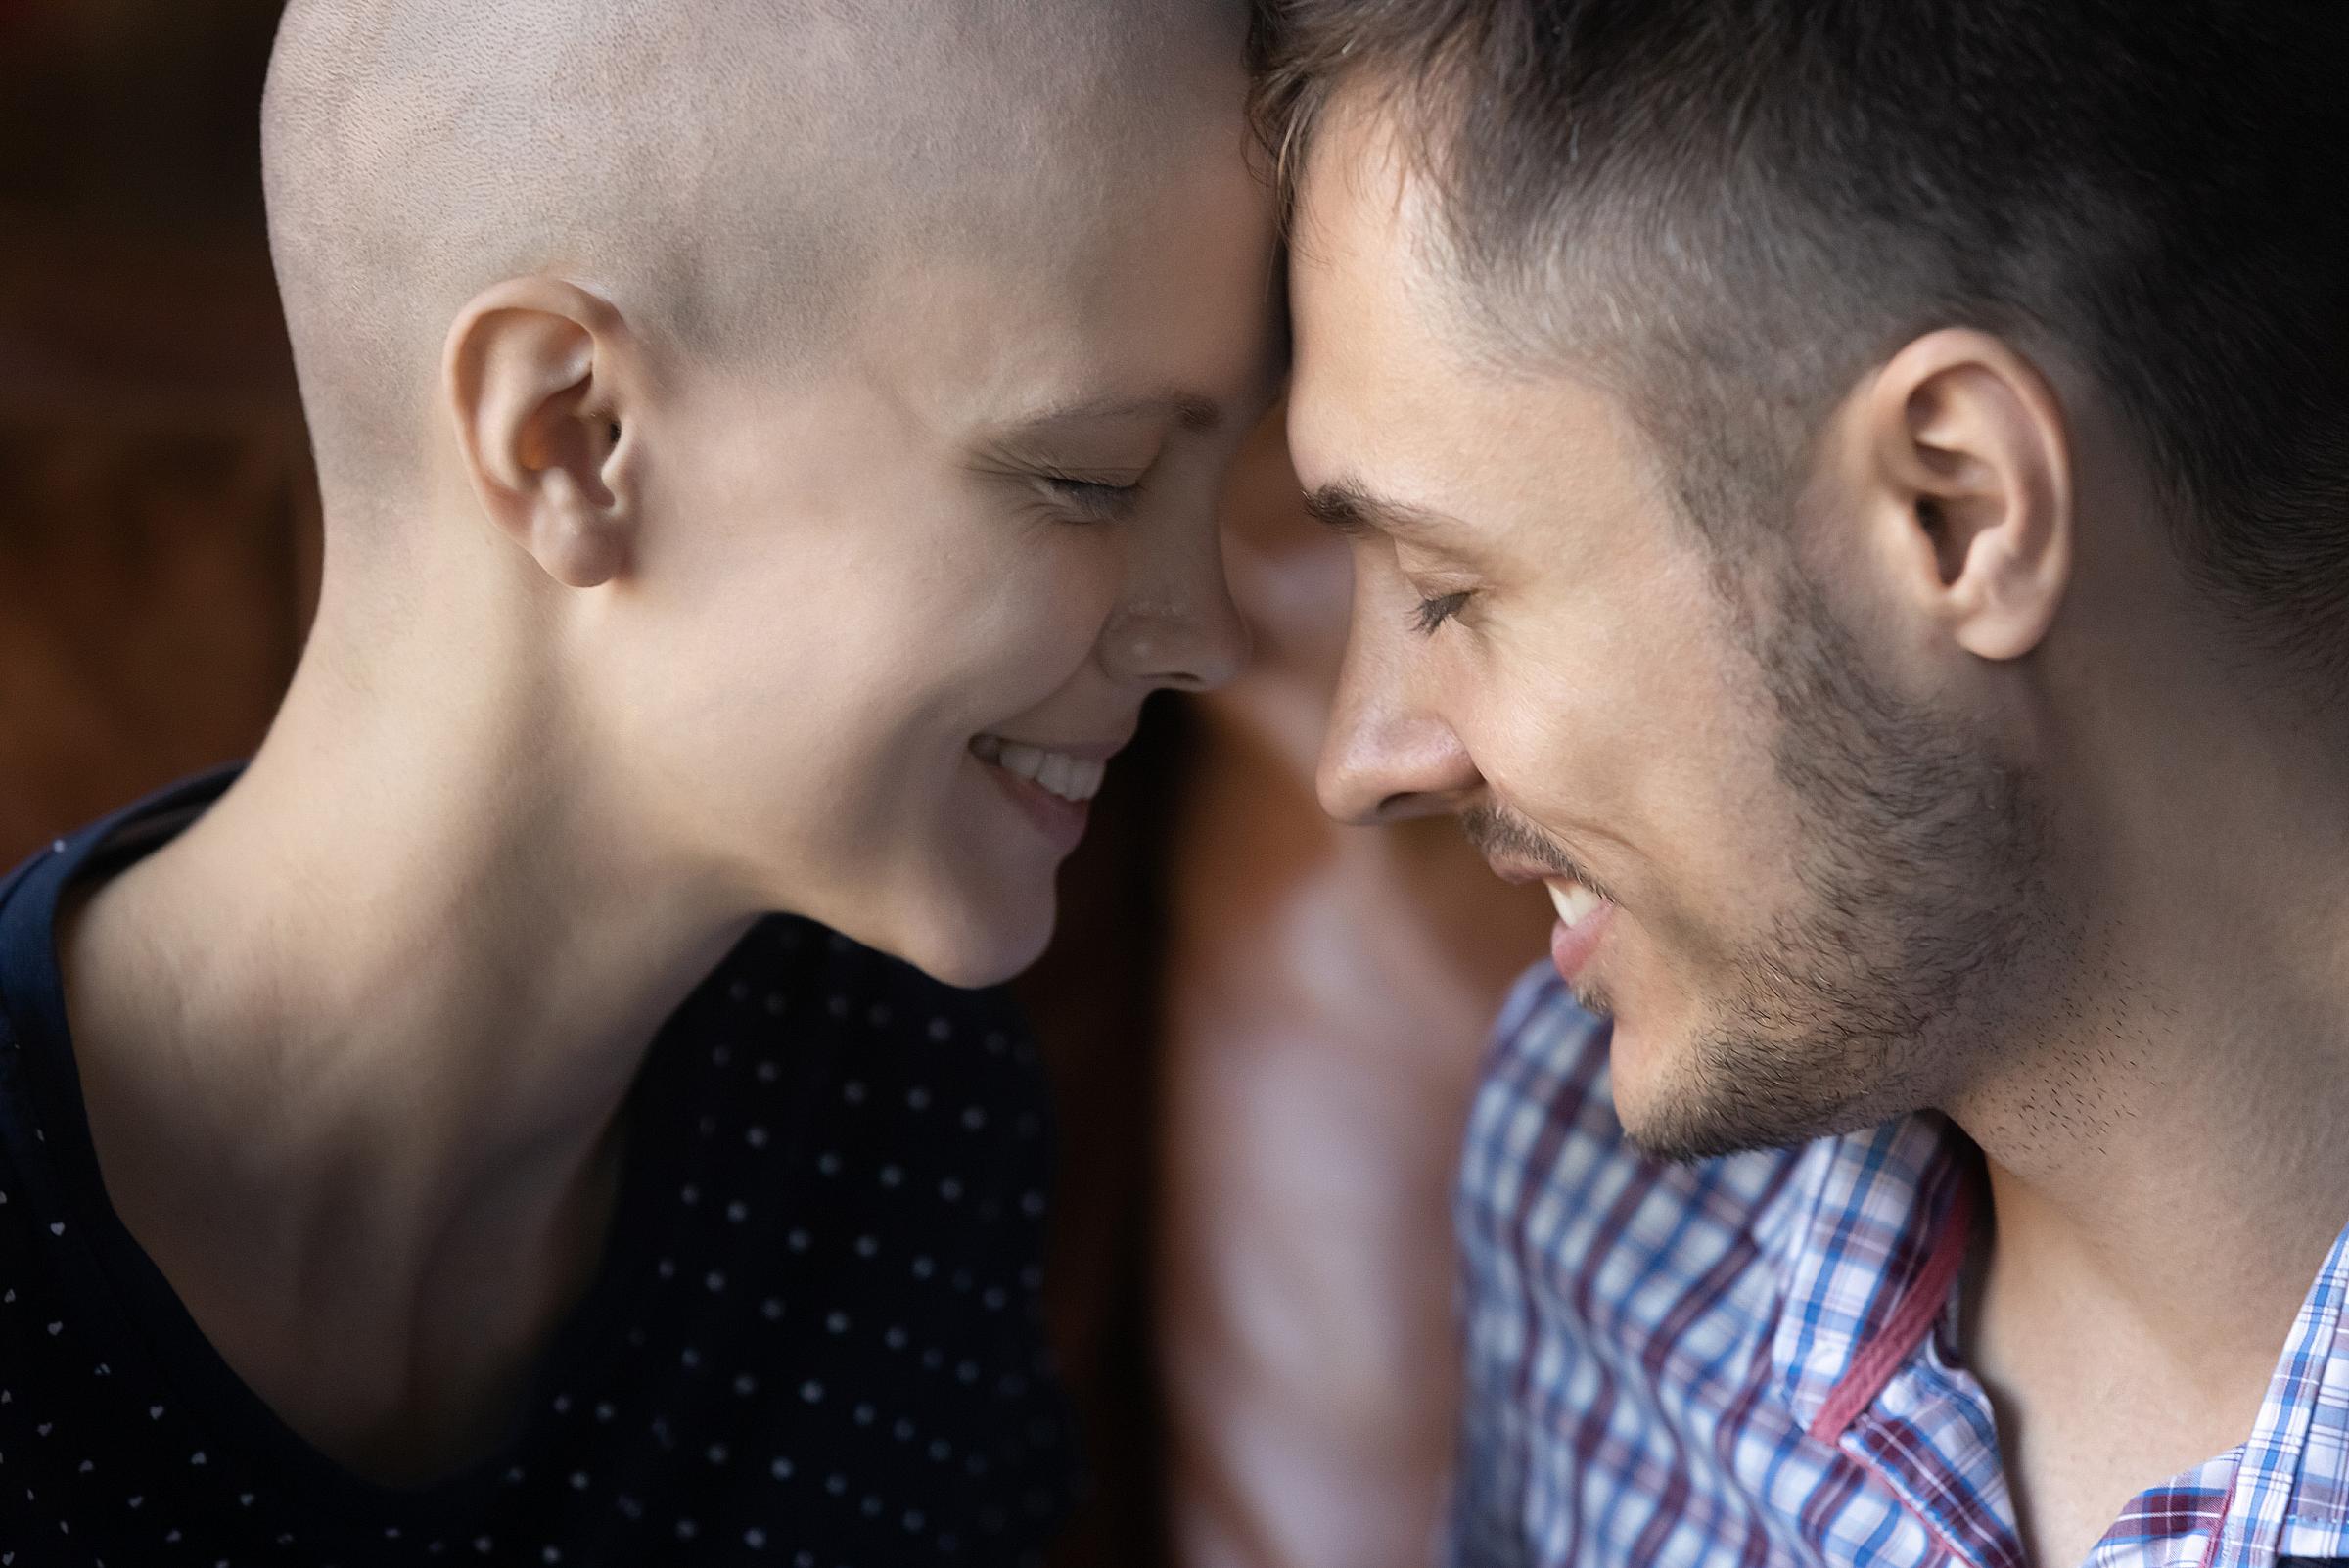 A couple lean foreheads together while smiling, one is bald from chemo treatments